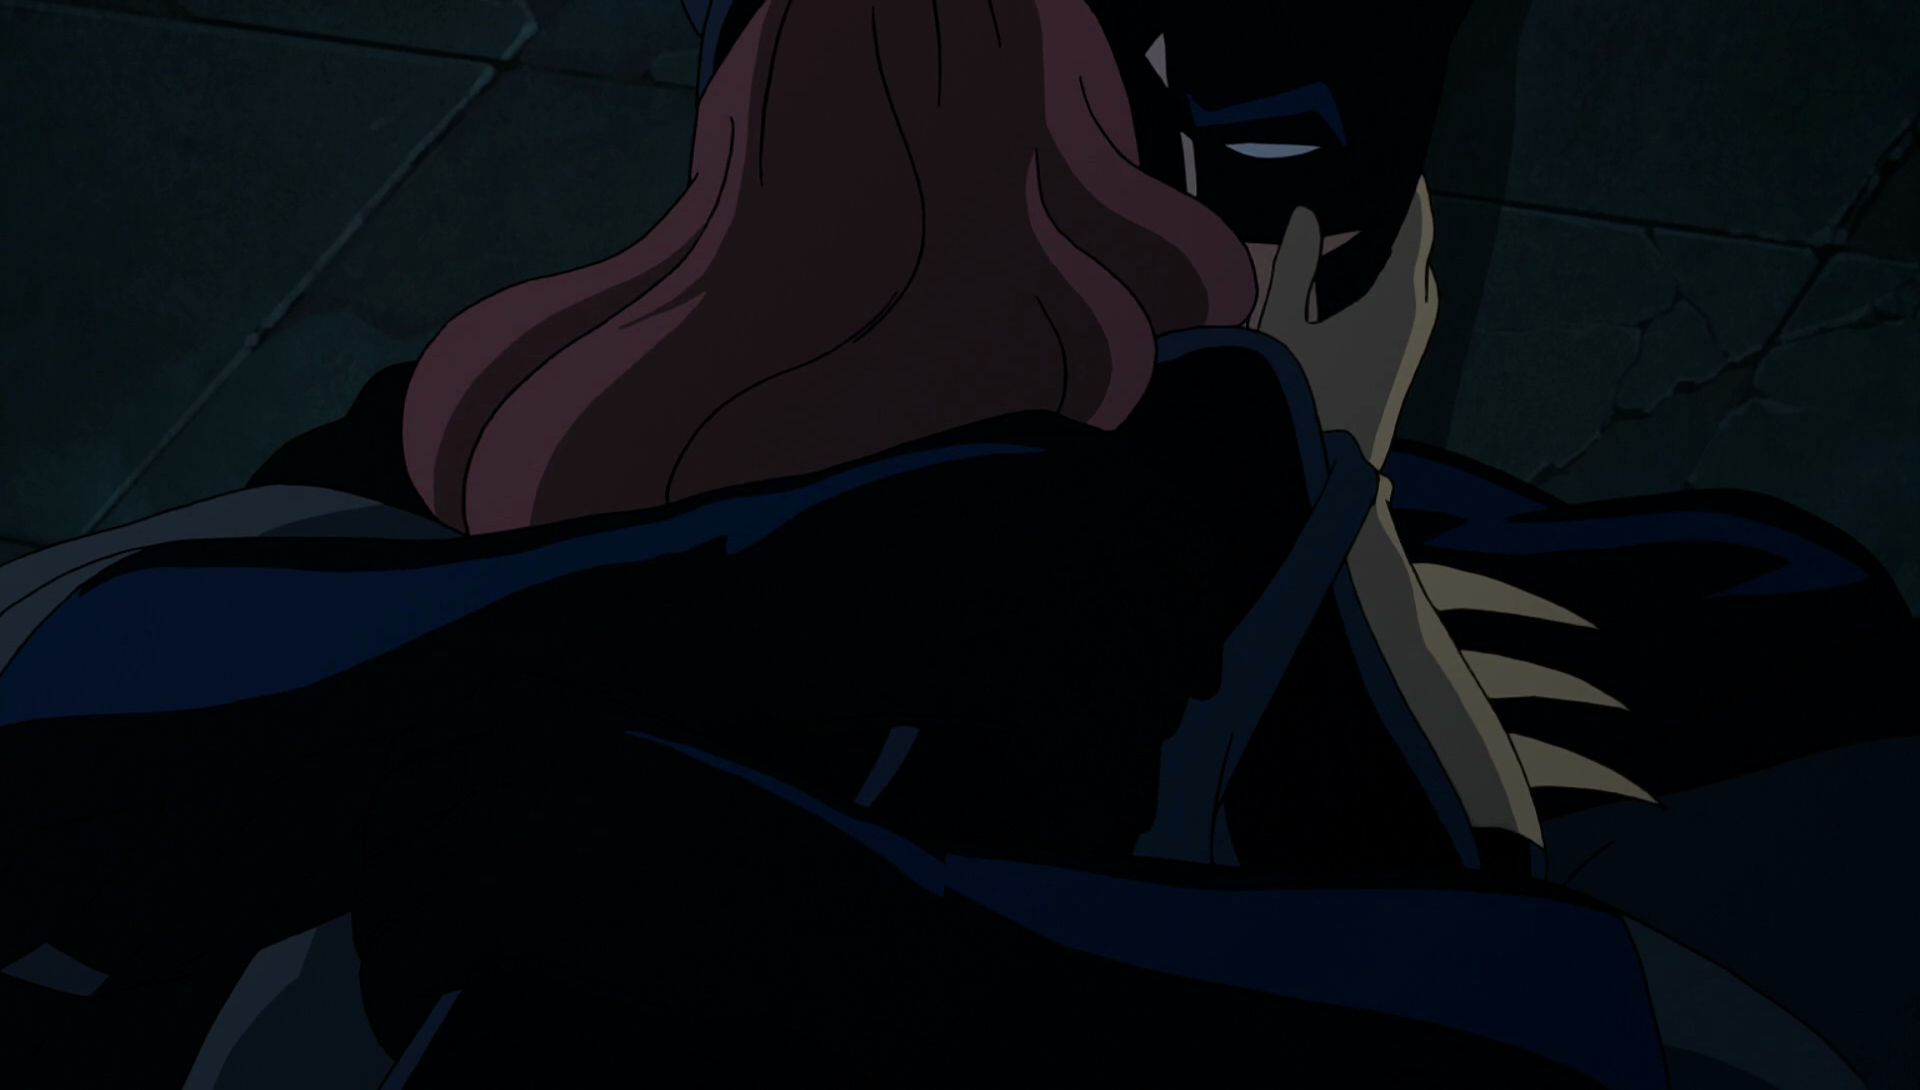 Continue below for an assortment of screengrabs from the Batman: The Killin...